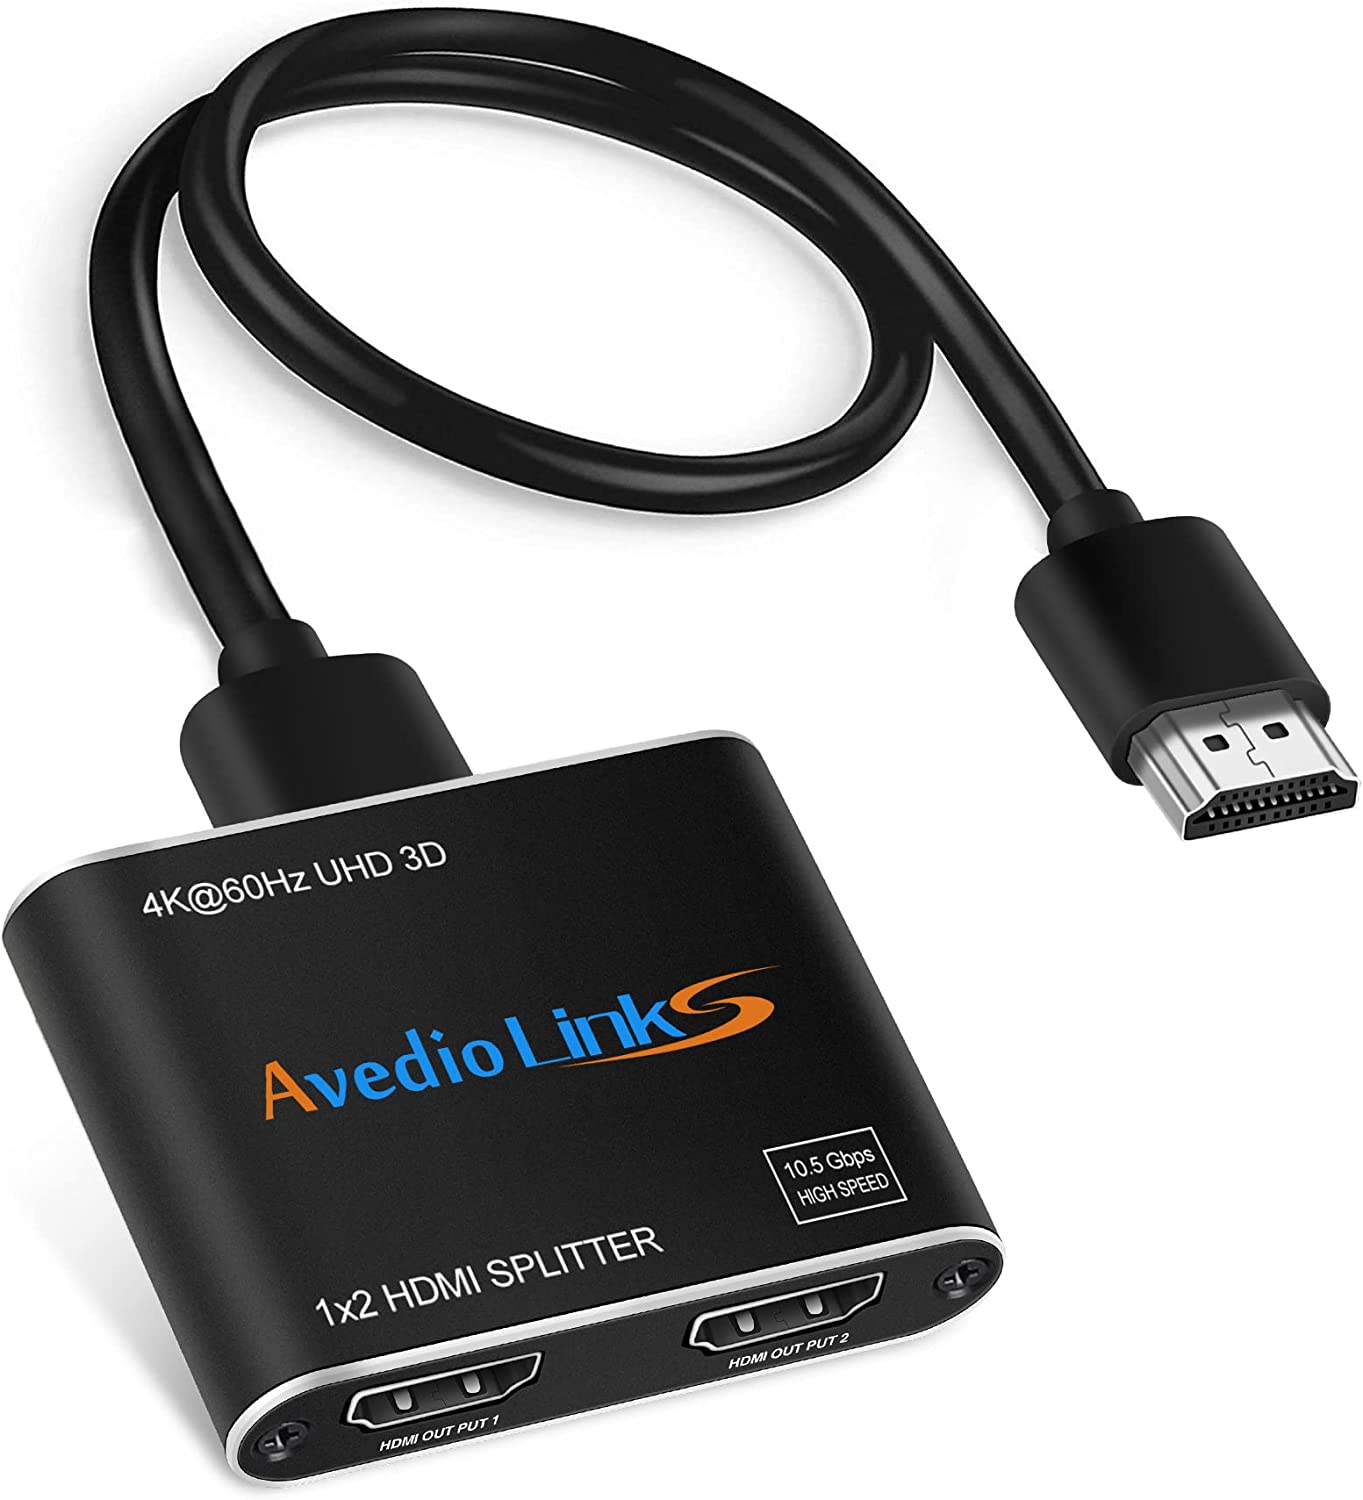 avedio links 4K@60Hz HDMI Splitter 1 in 2 Out, 2 Way HDMI Splitter for Dual Monitors, 1x2 HDMI 2.0 Splitter Video Distributor Mirror Only, Support Full HD